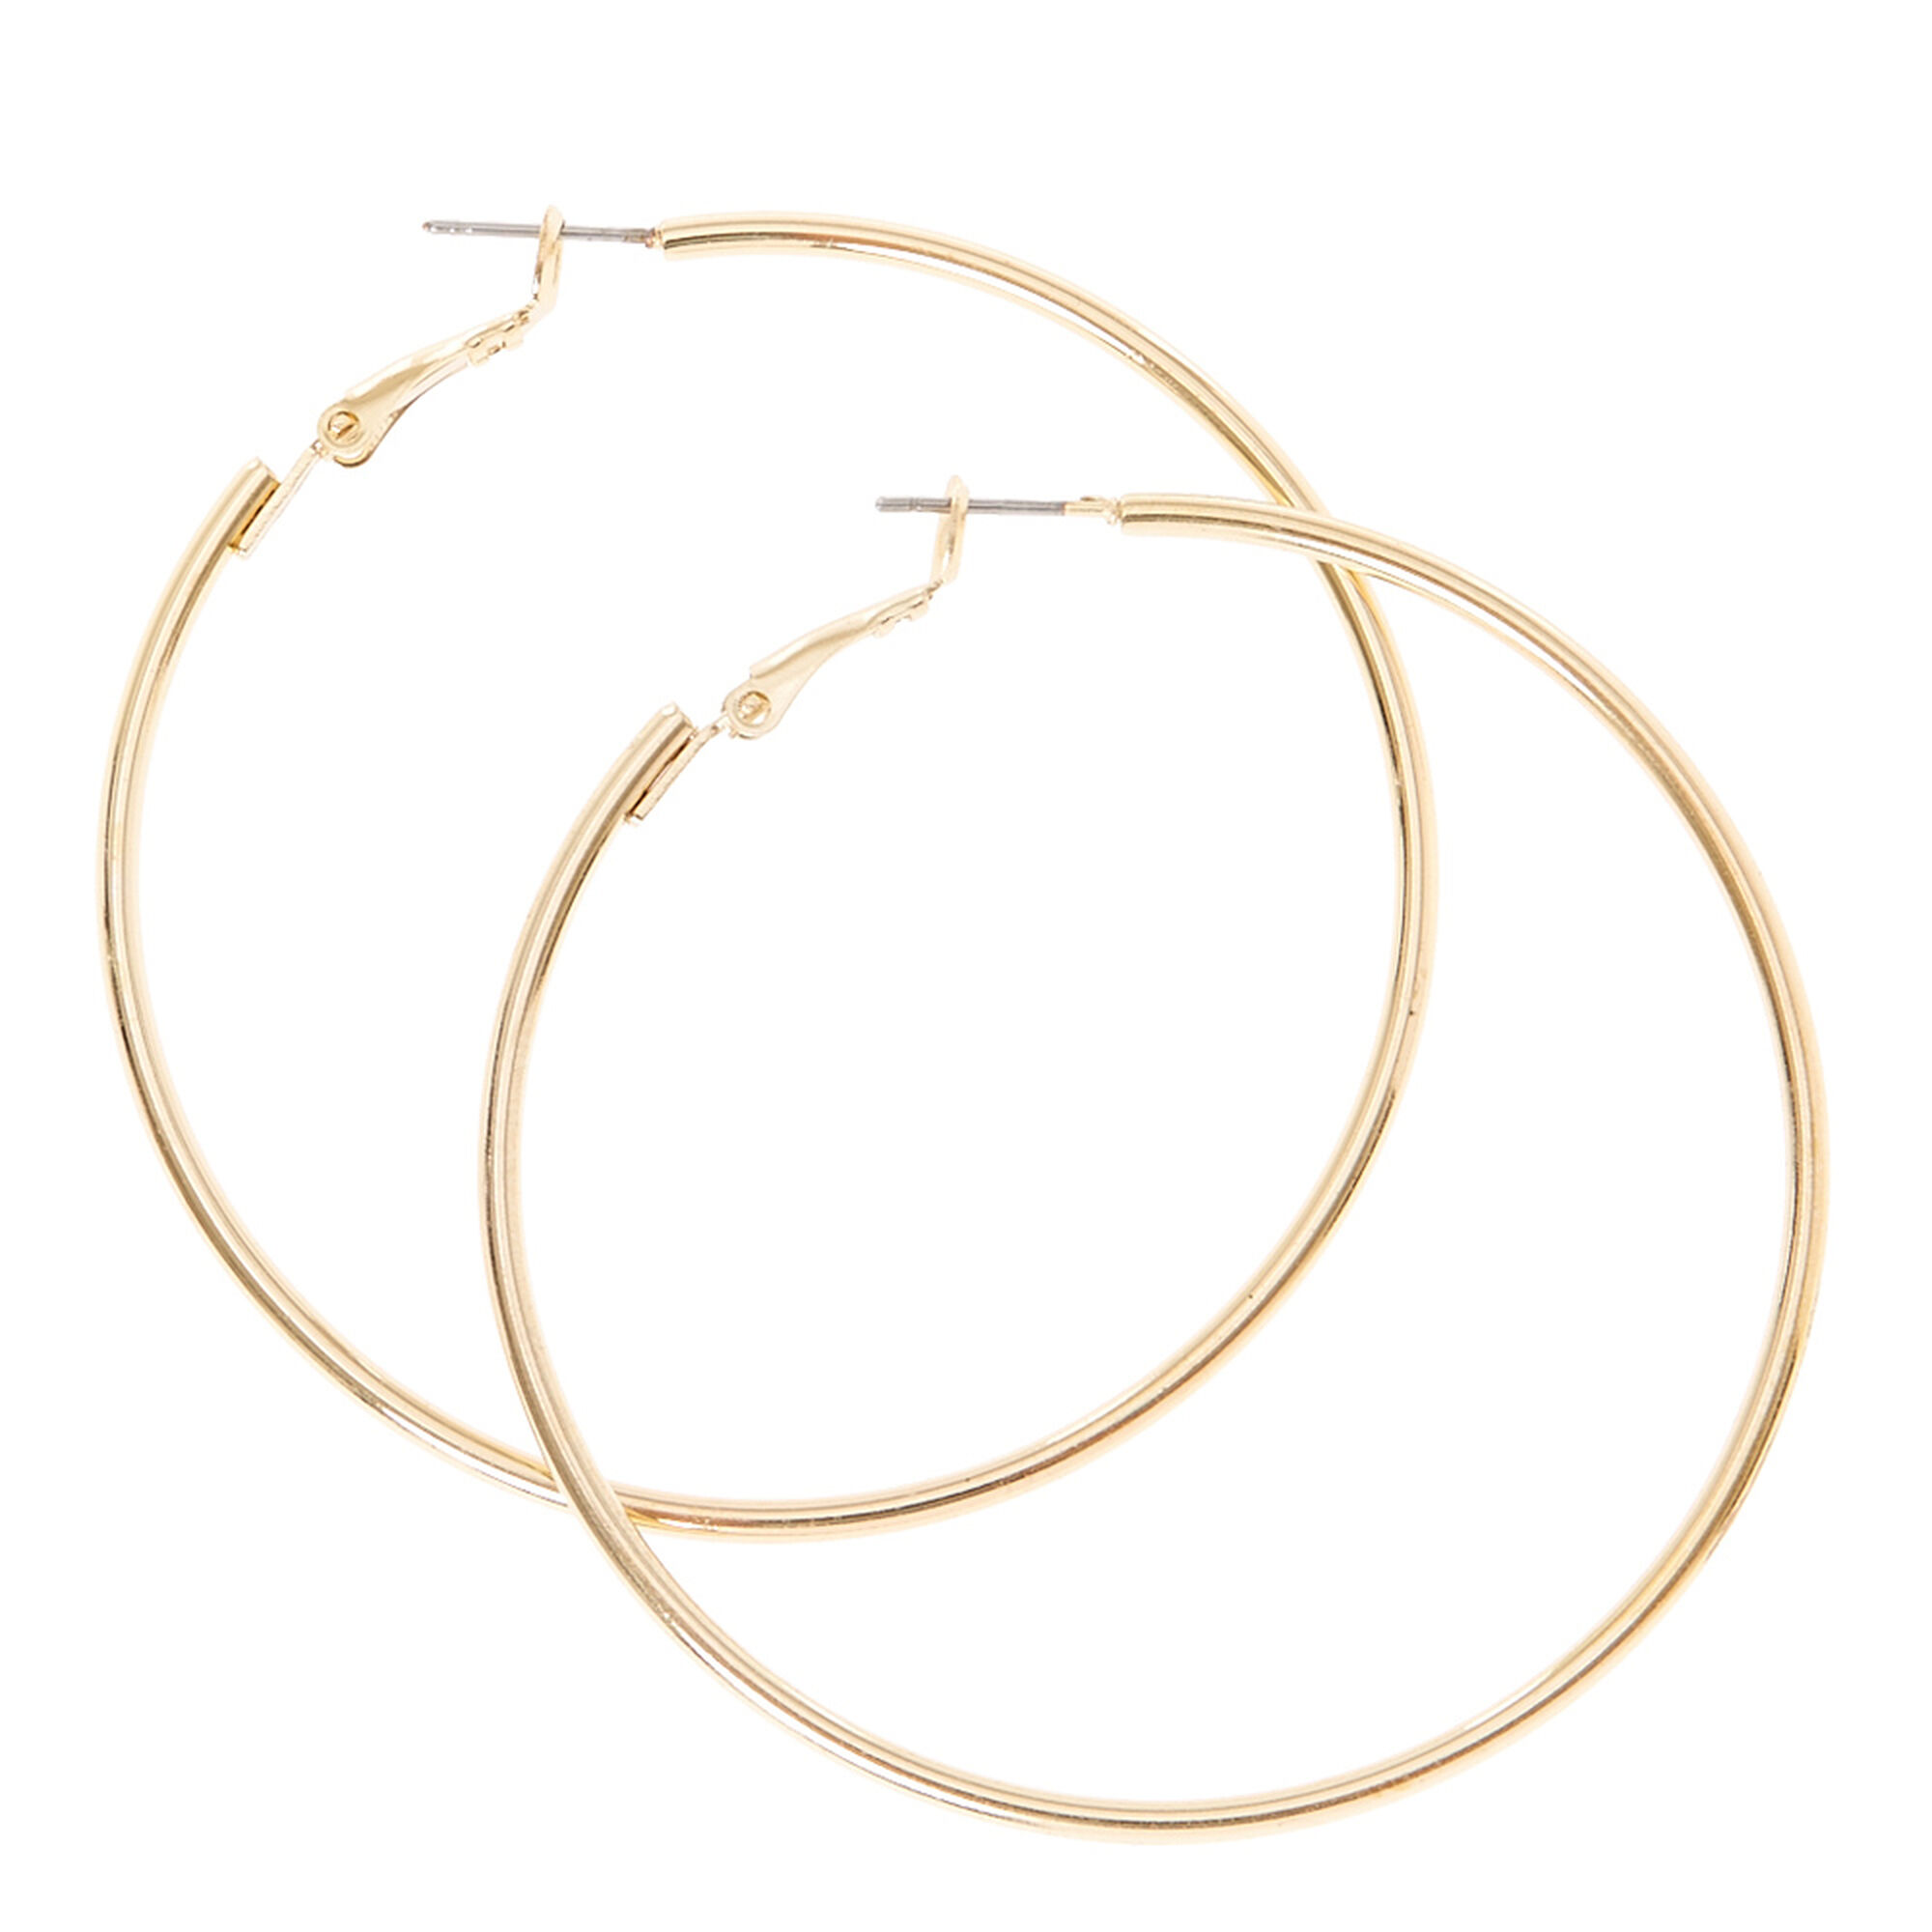 View Claires Tone 60MM Hoop Earrings Gold information